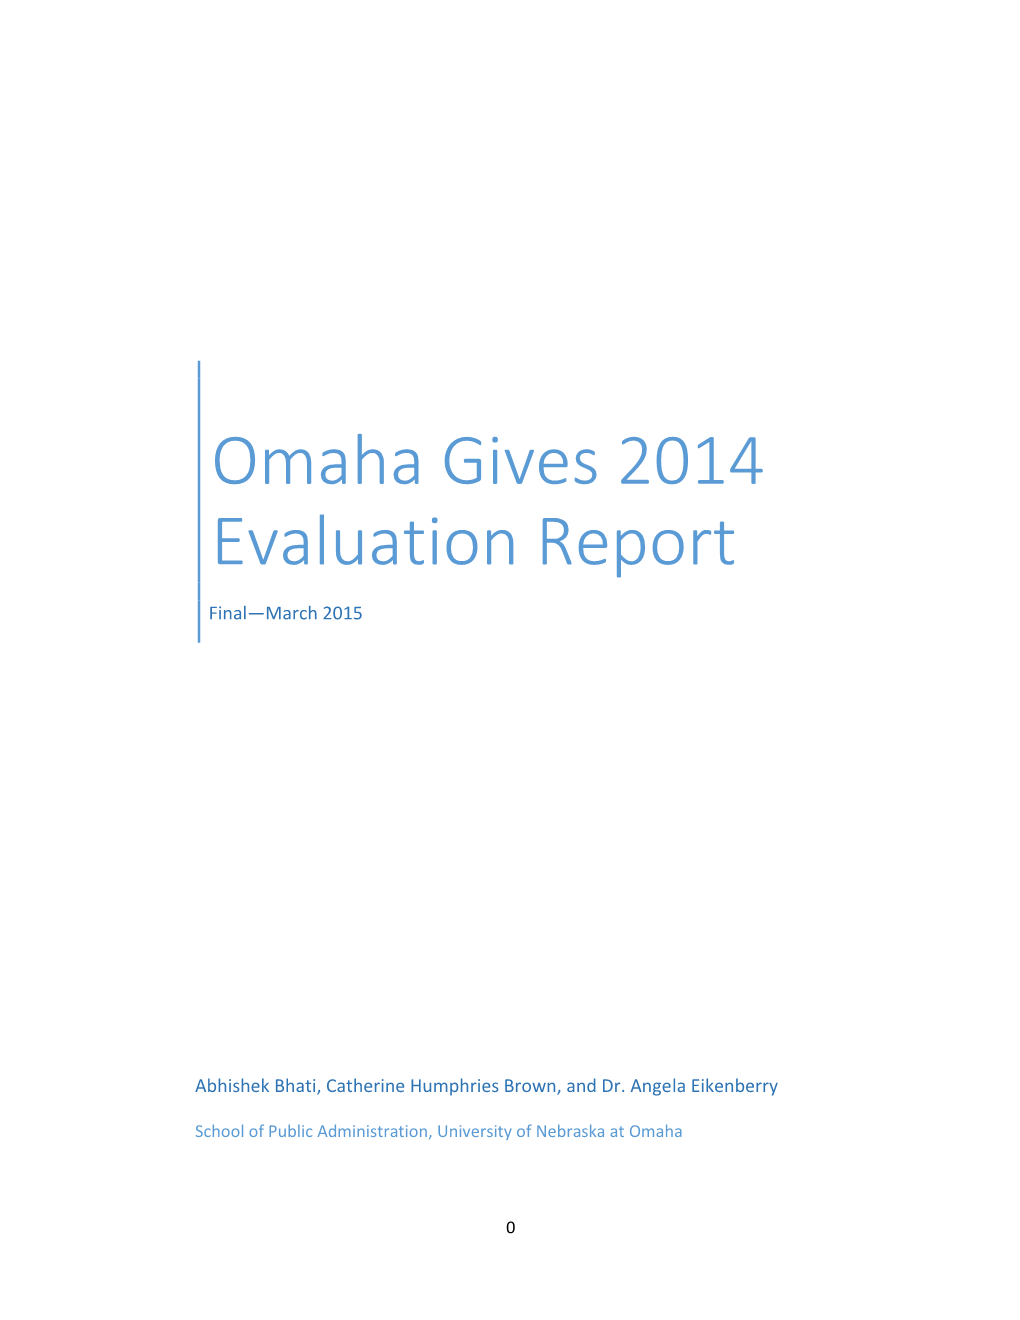 Omaha Gives 2014 Evaluation Report